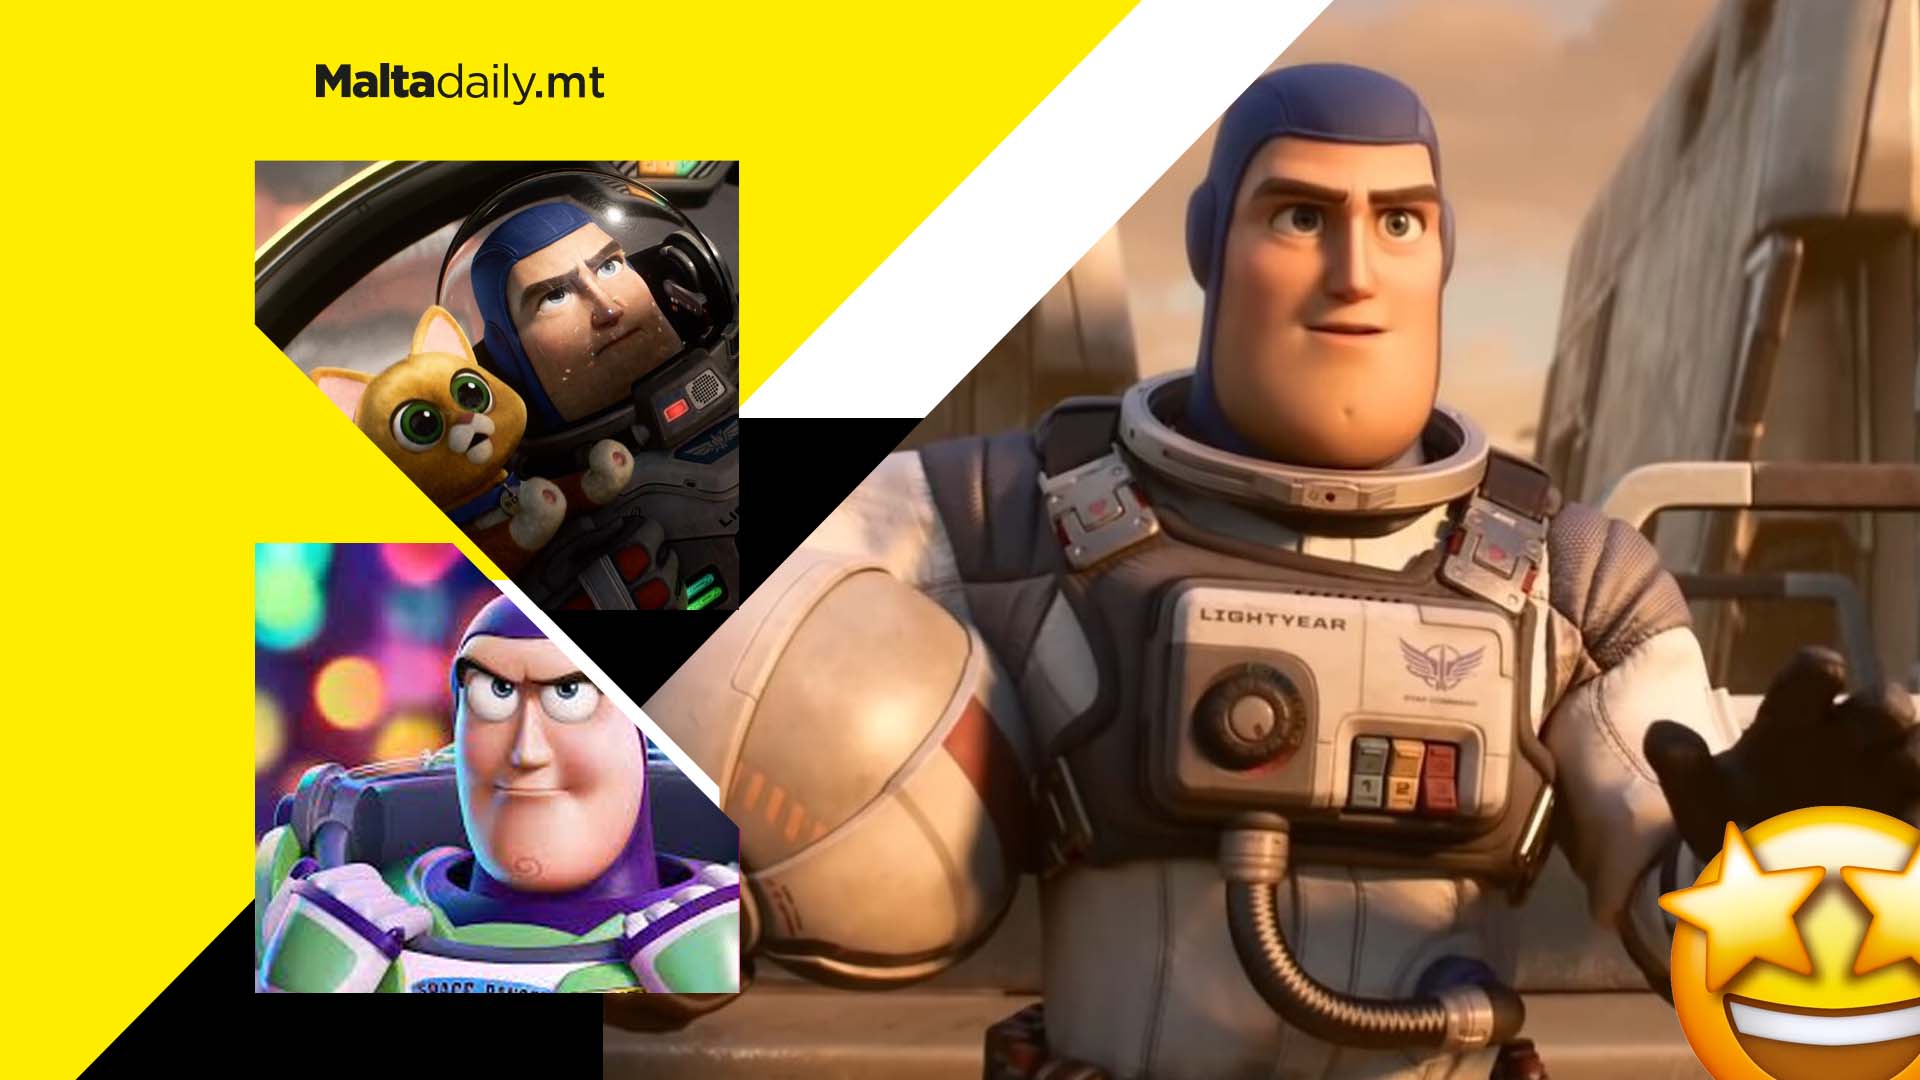 Official trailer for Disney and Pixar's Lightyear finally drops